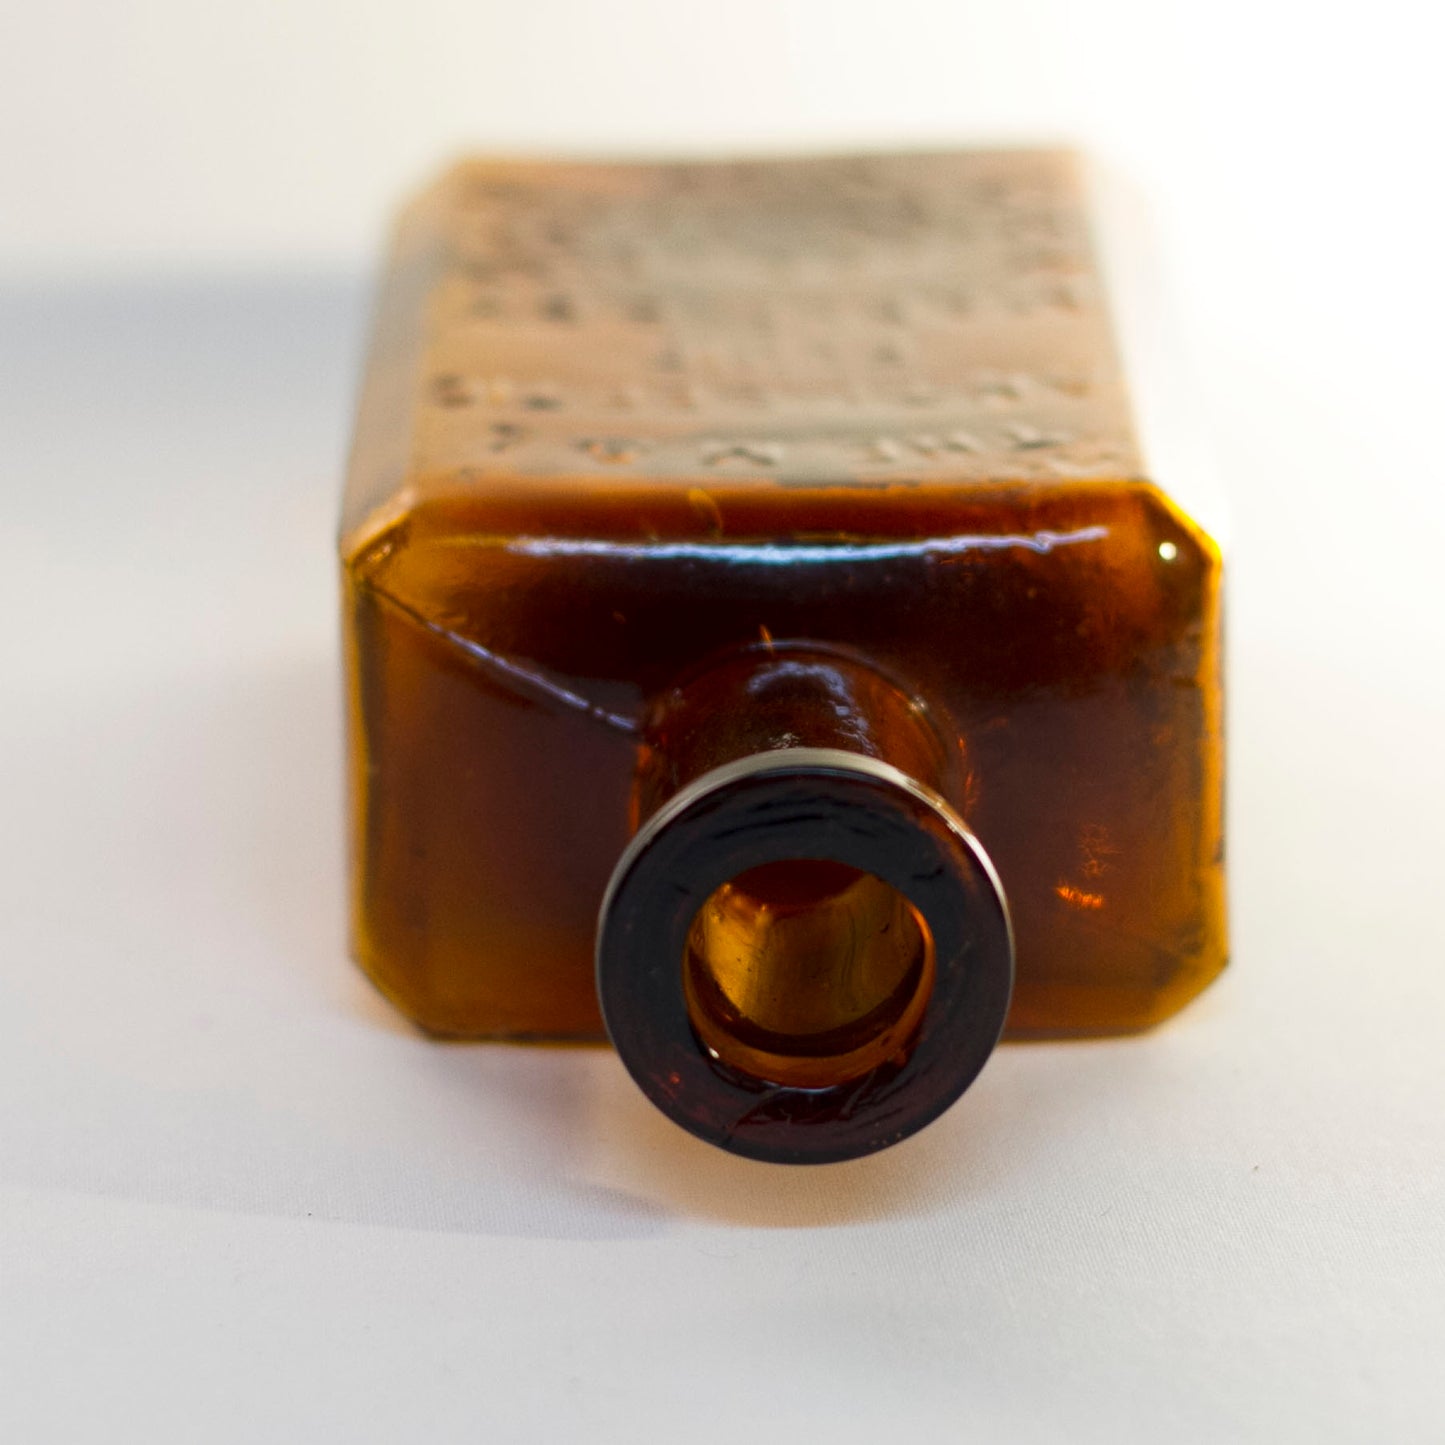 Antique Amber Glass M & L ANTI-SEPTIC Fluid Bottle for Embalming by Mills & Lacey Circa 1880s